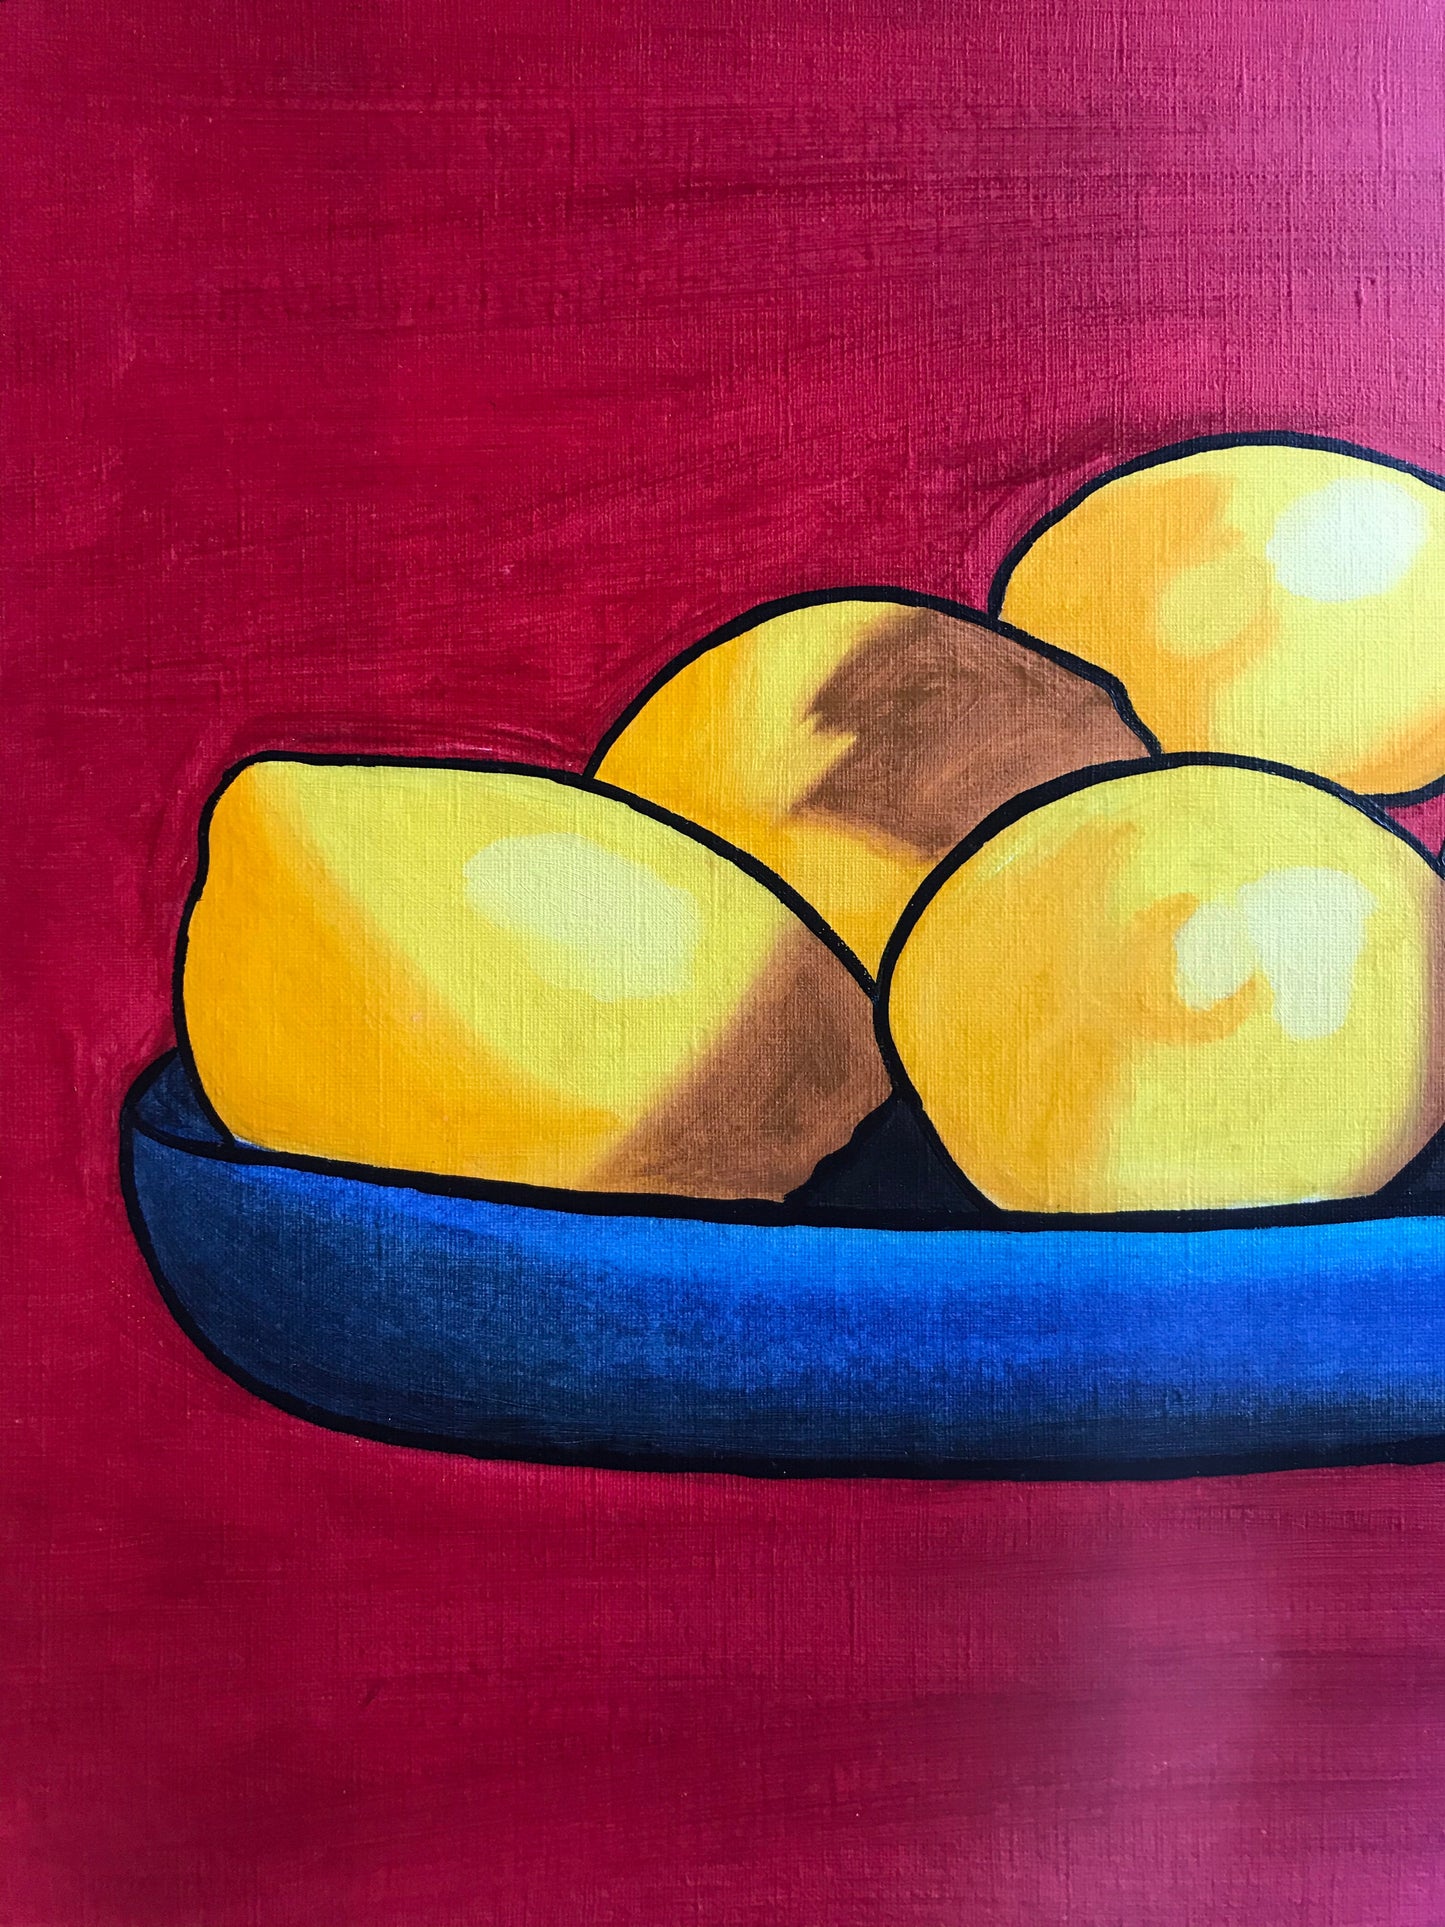 An oil painting of yellow lemons on a blue plate against a red background